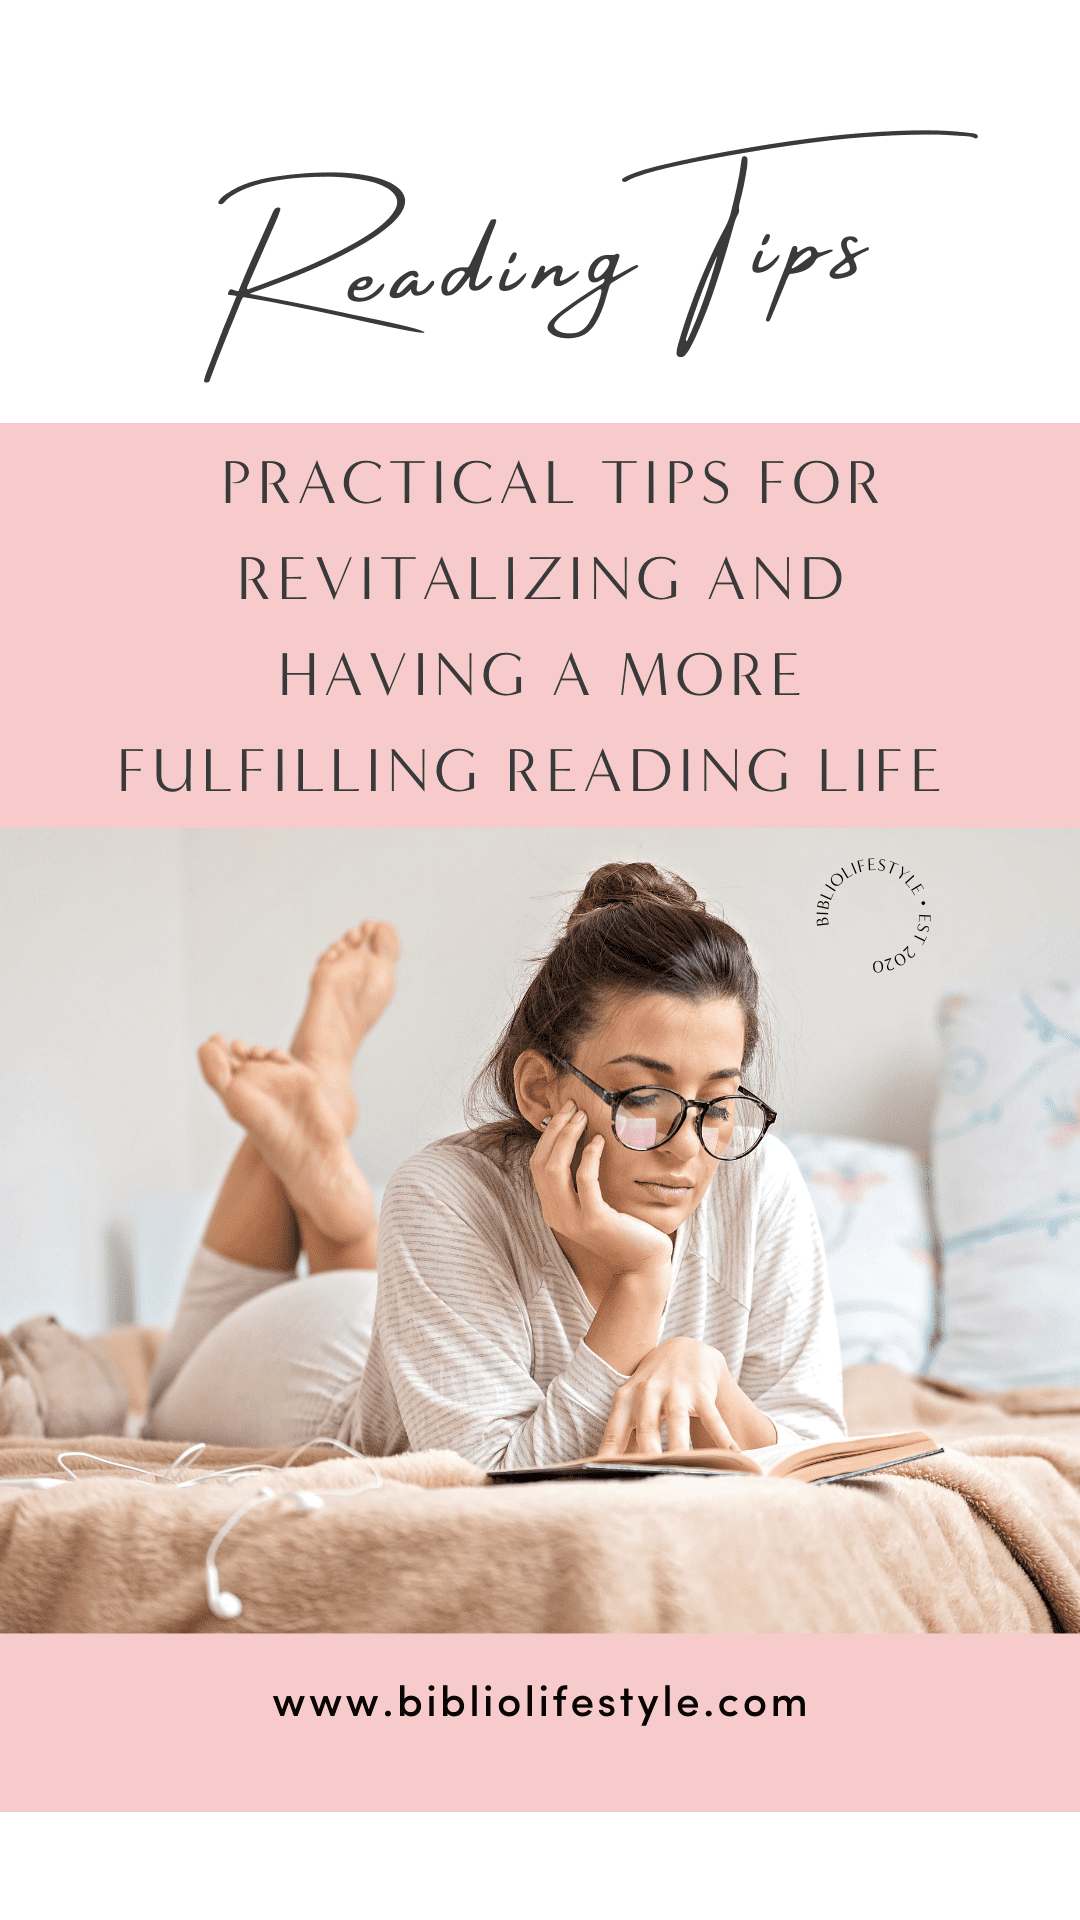 Adult Reading Tips - How To Revitalize and Have a More Fulfilling Reading Life